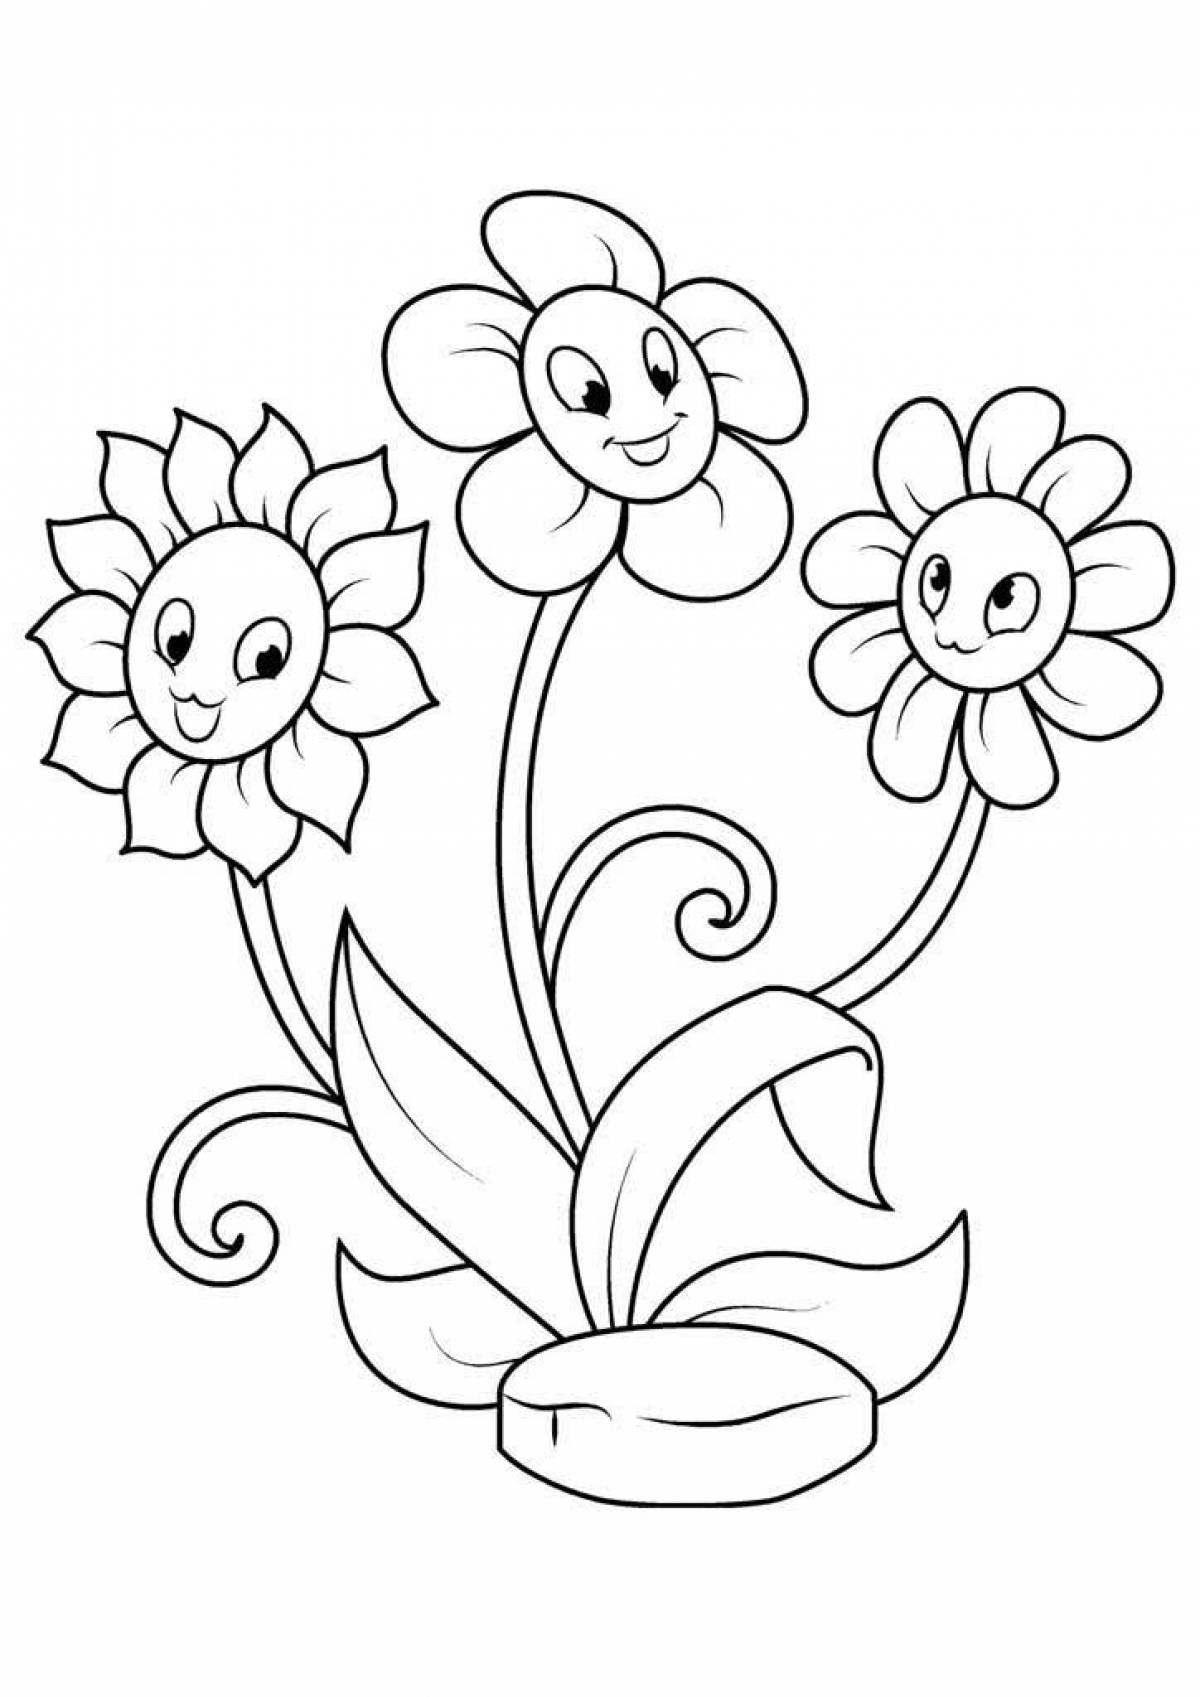 Sublime coloring flowers for children 6-7 years old